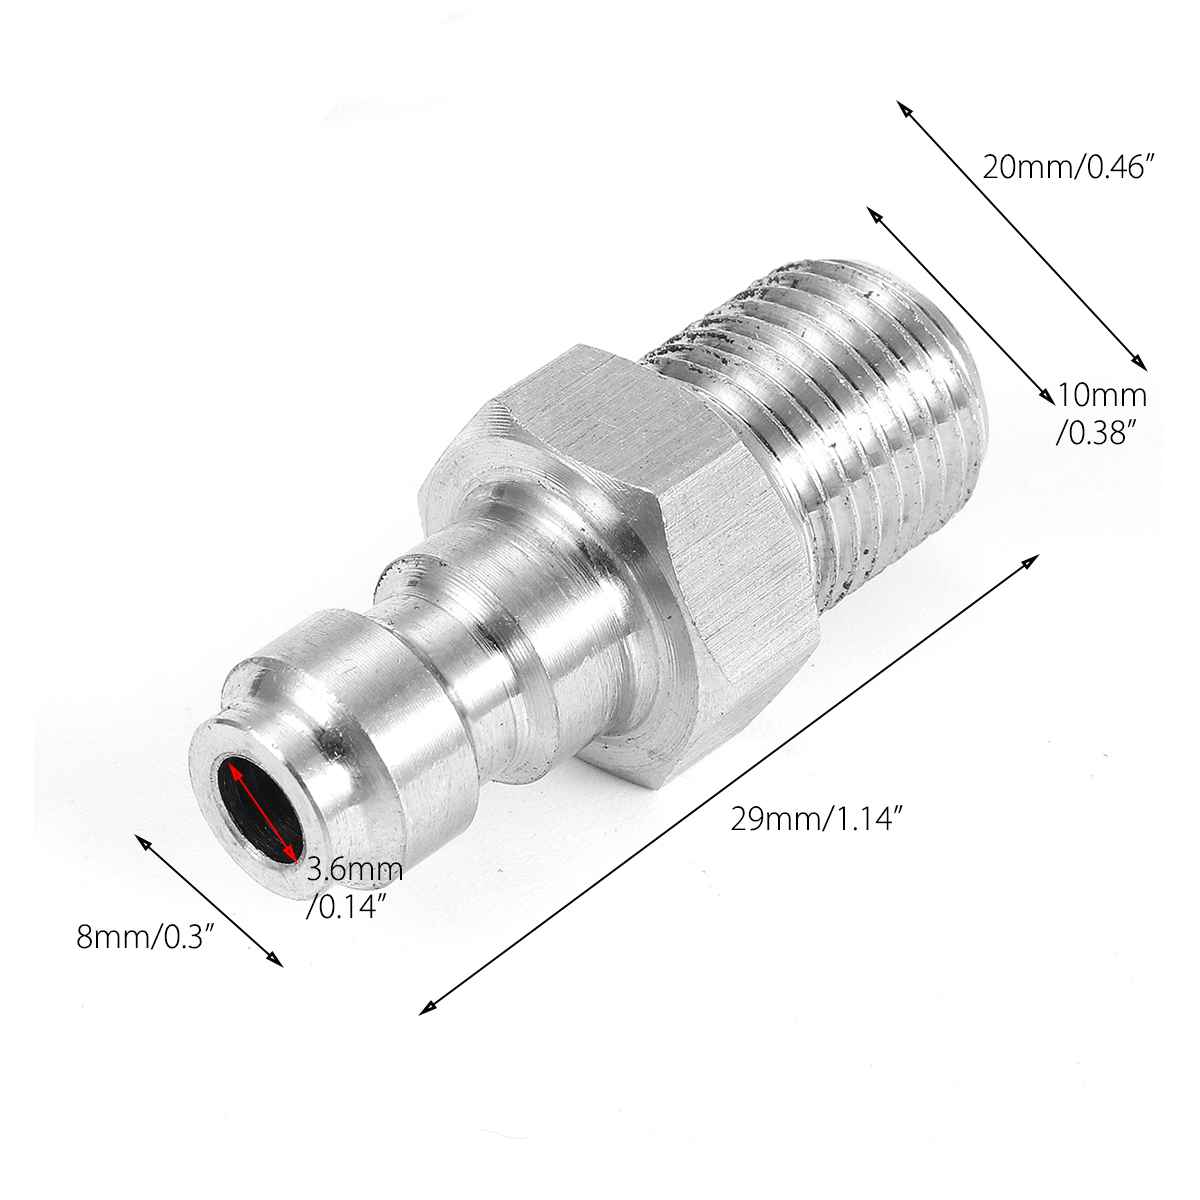 Paintball-PCP-Fill-Nipple-Adapter-Stainless-Steel-8mm-Thread-One-Way-Foster-Connector-18-BSPP-1320333